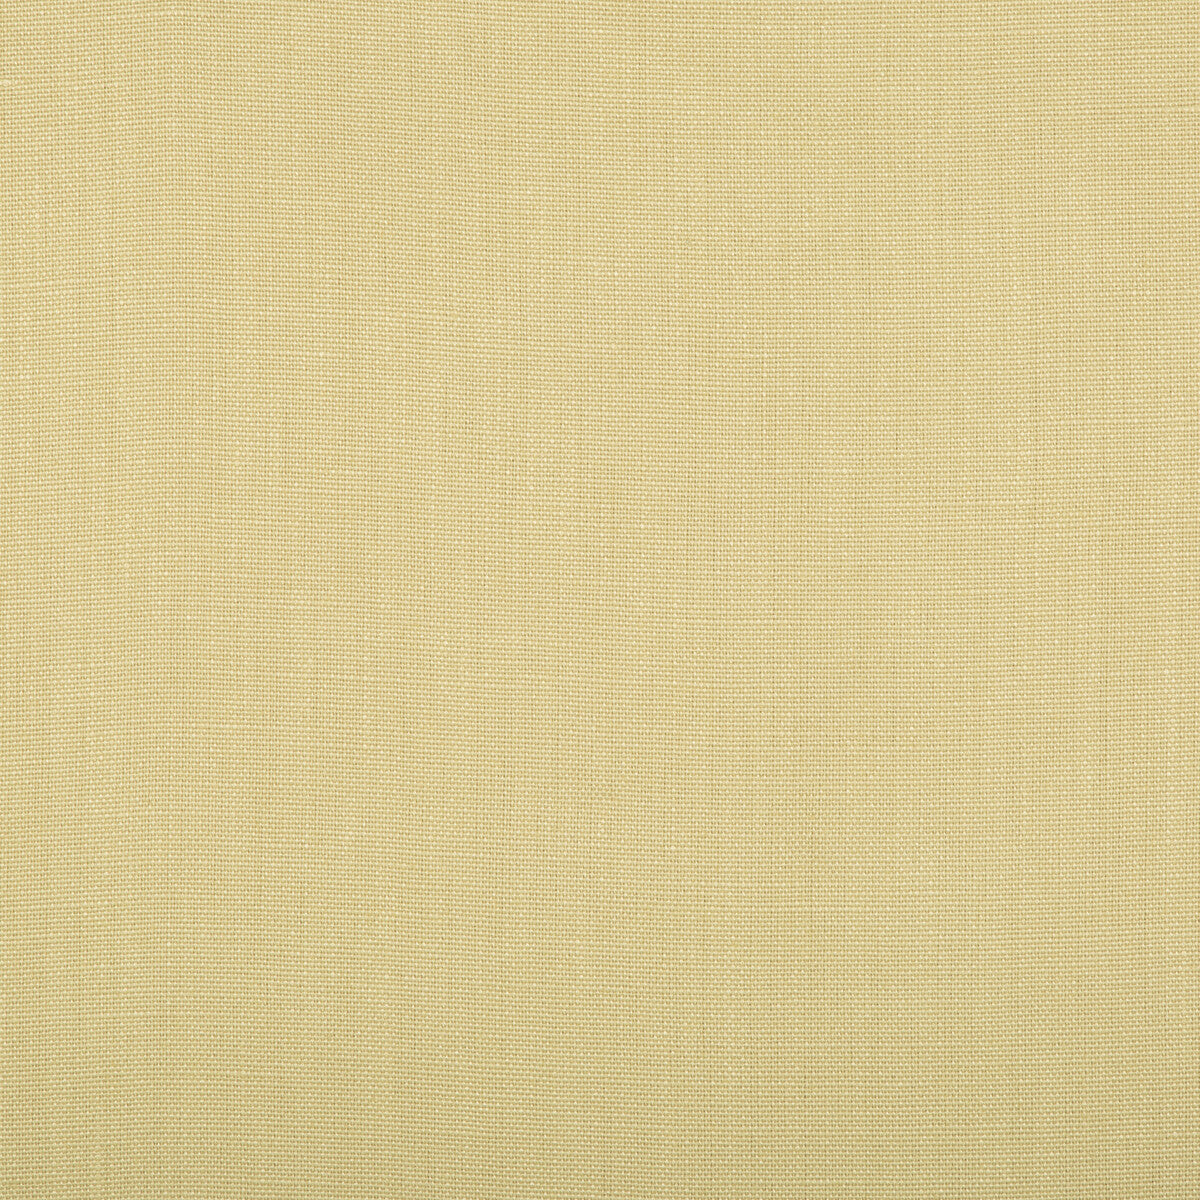 Stone Harbor fabric in antique color - pattern 27591.416.0 - by Kravet Basics